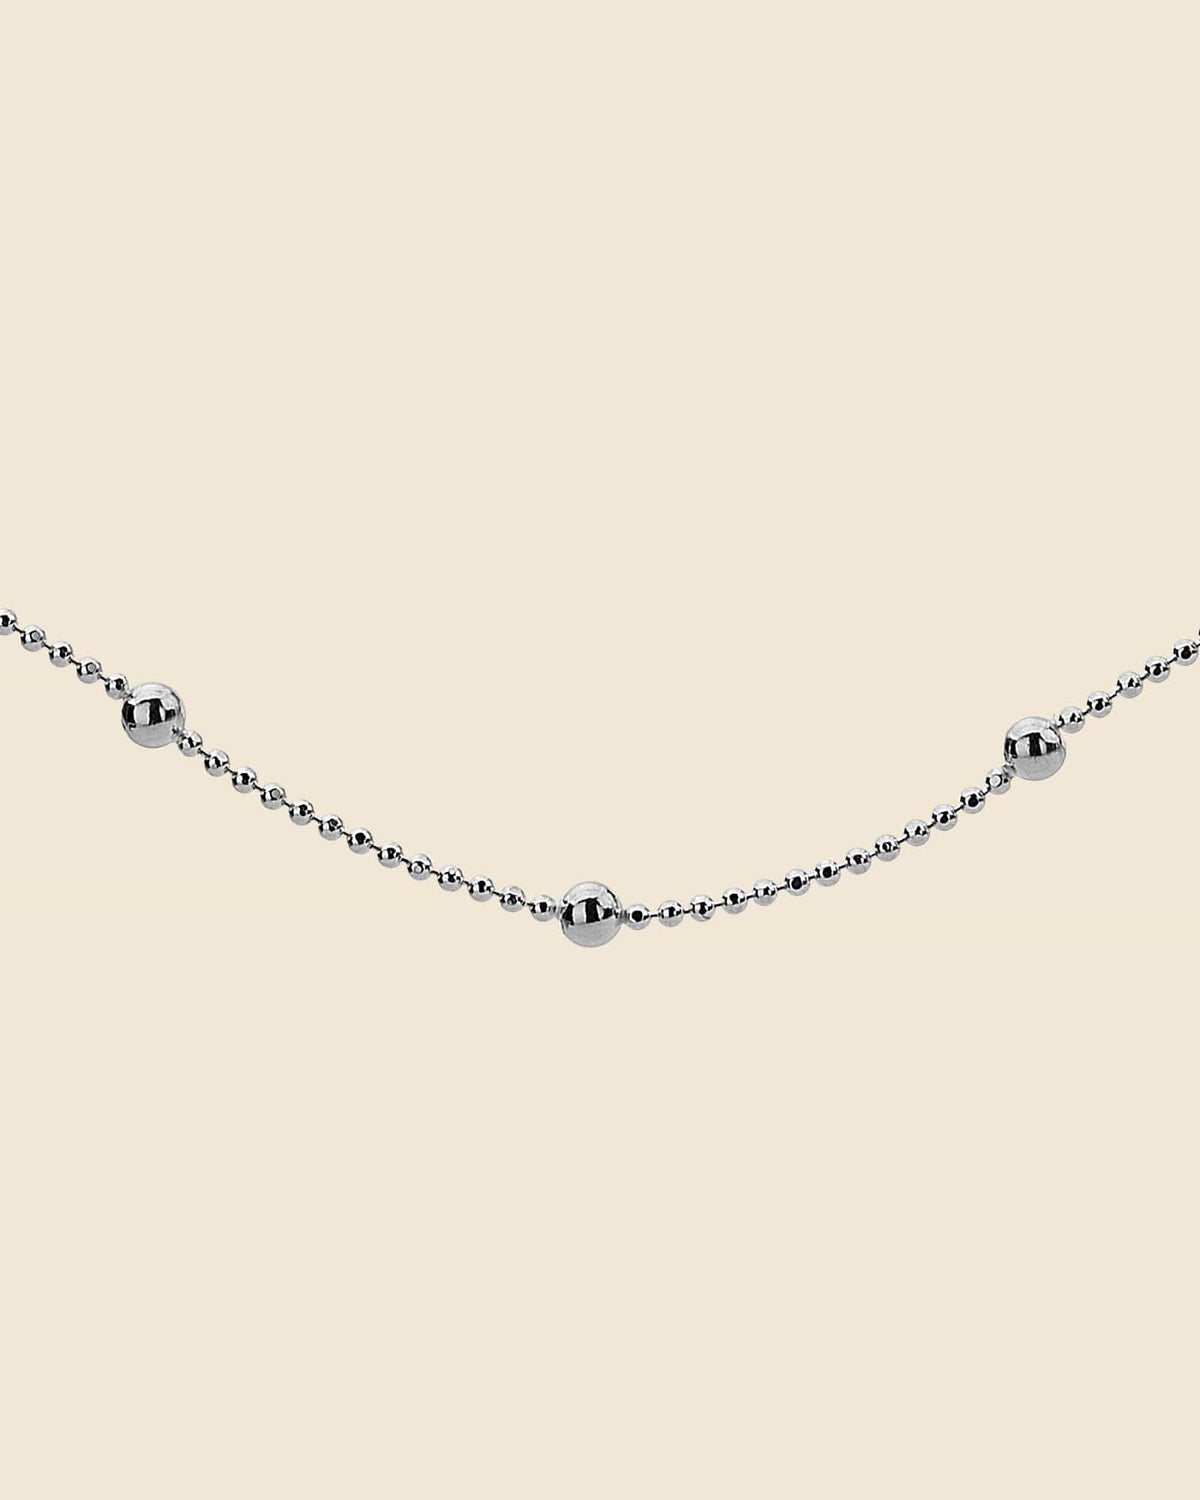 80cm Sterling Silver Bobble Station Chain